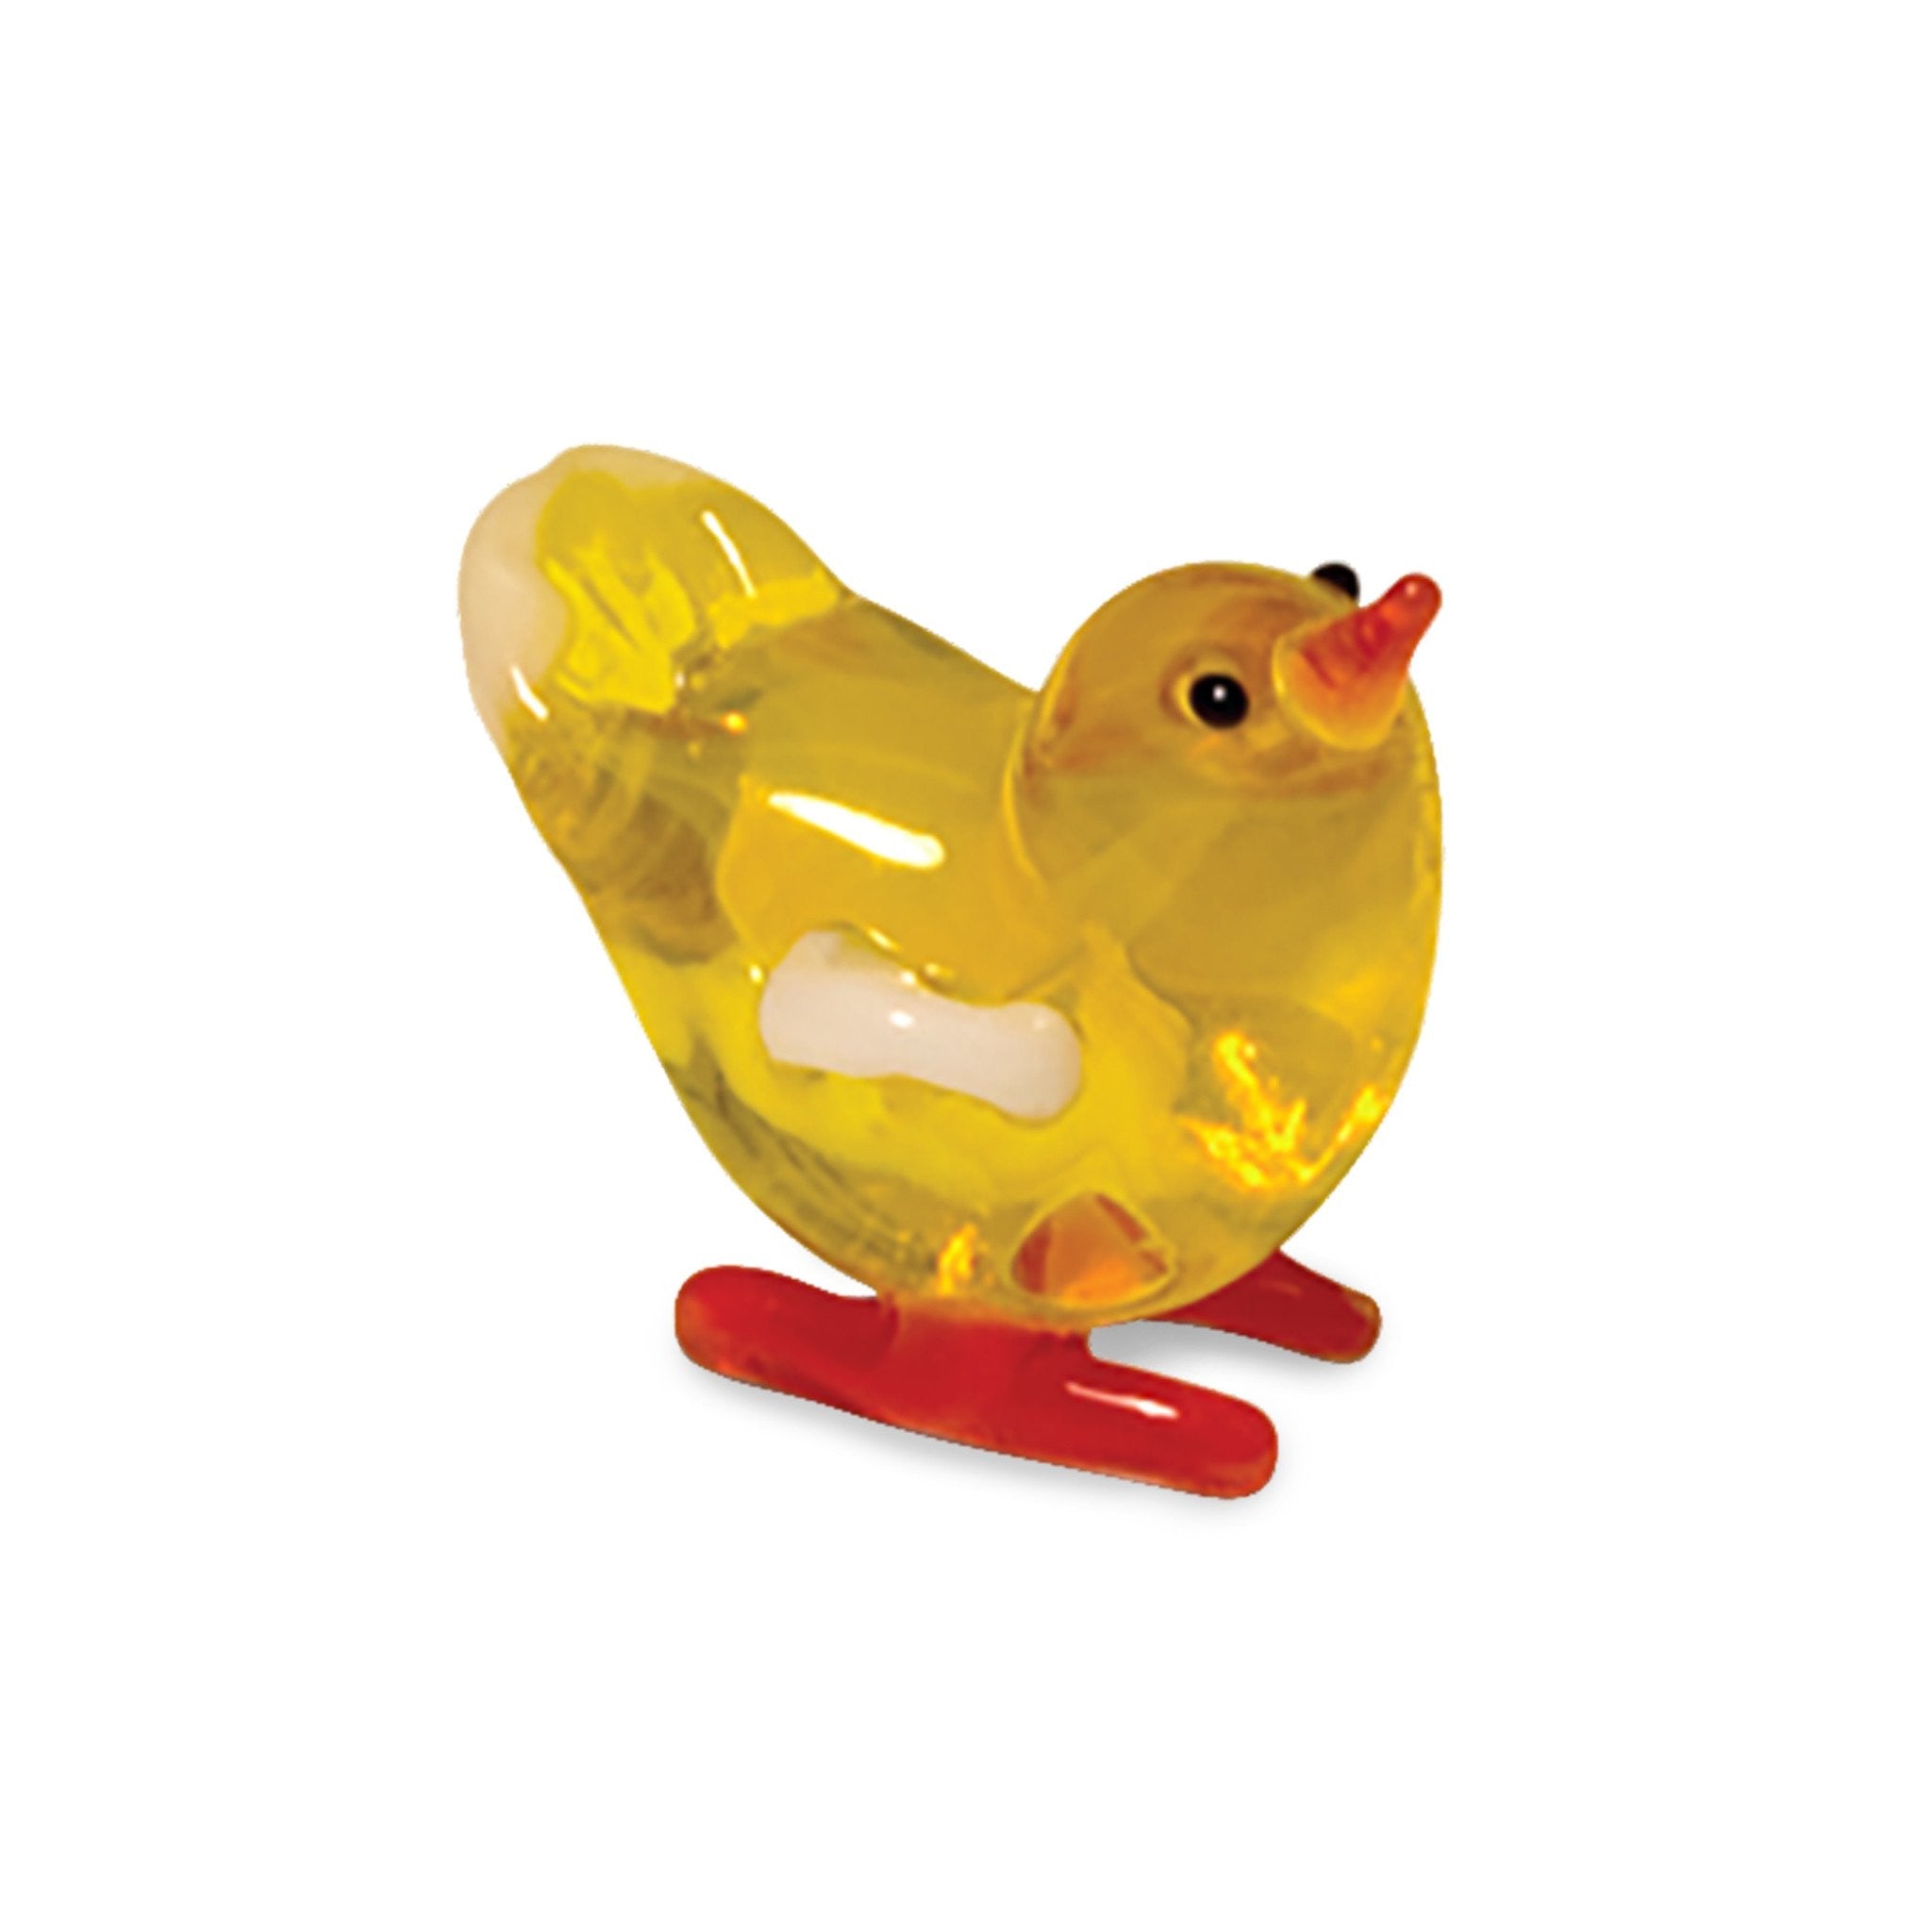 Pep the Chick (in Tynies Collector's Frame) Miniature glass figurines 